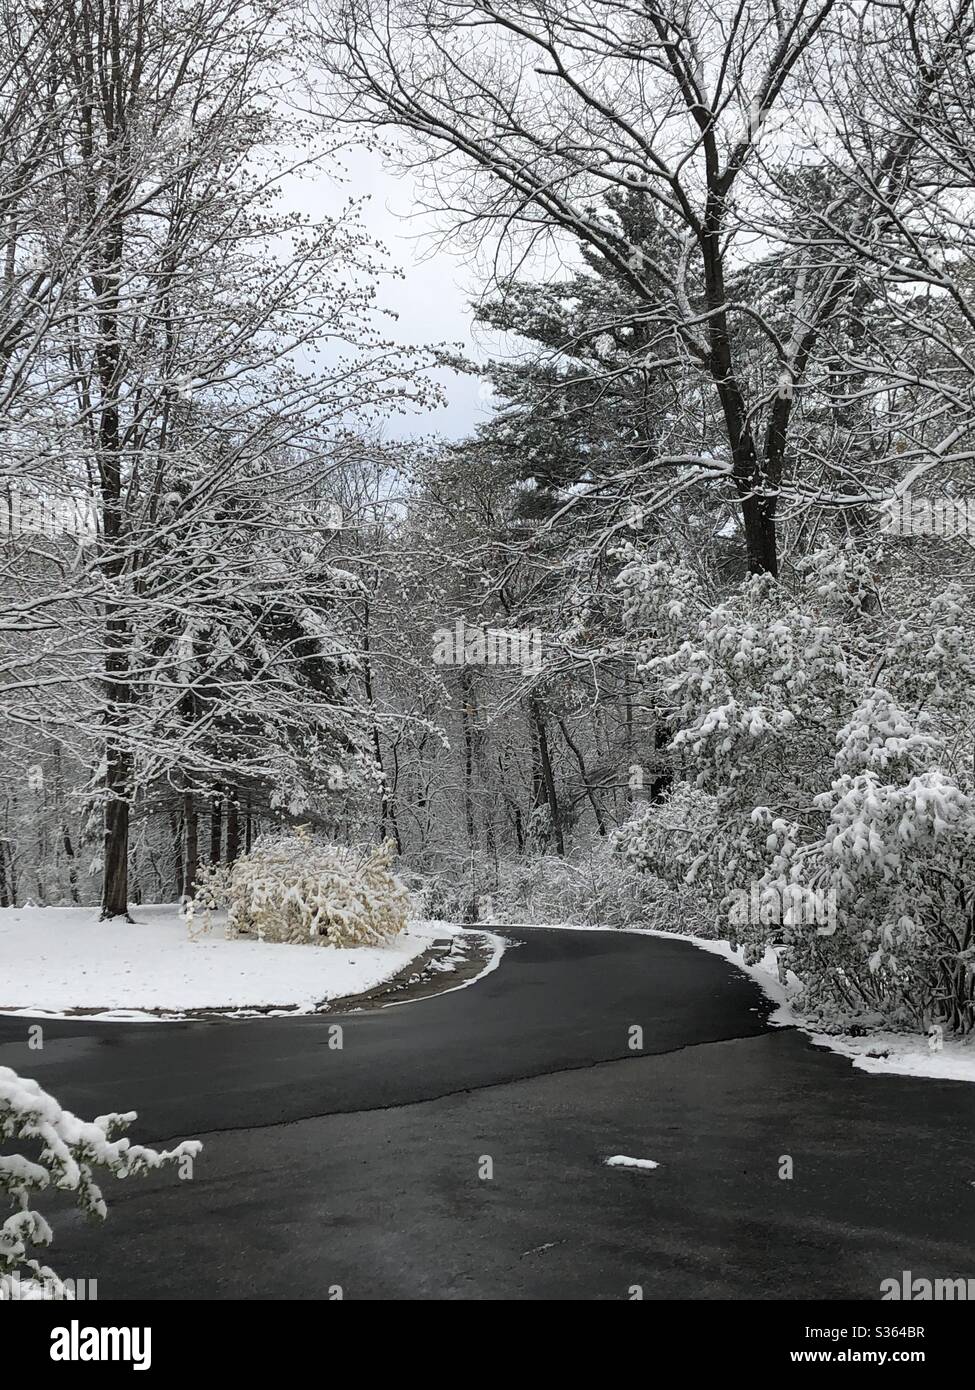 Unexpected late Spring snowfall and wintry weatheron May 9th, 2020 in Bennington, Vermont. Snow covered trees and driveway. Stock Photo